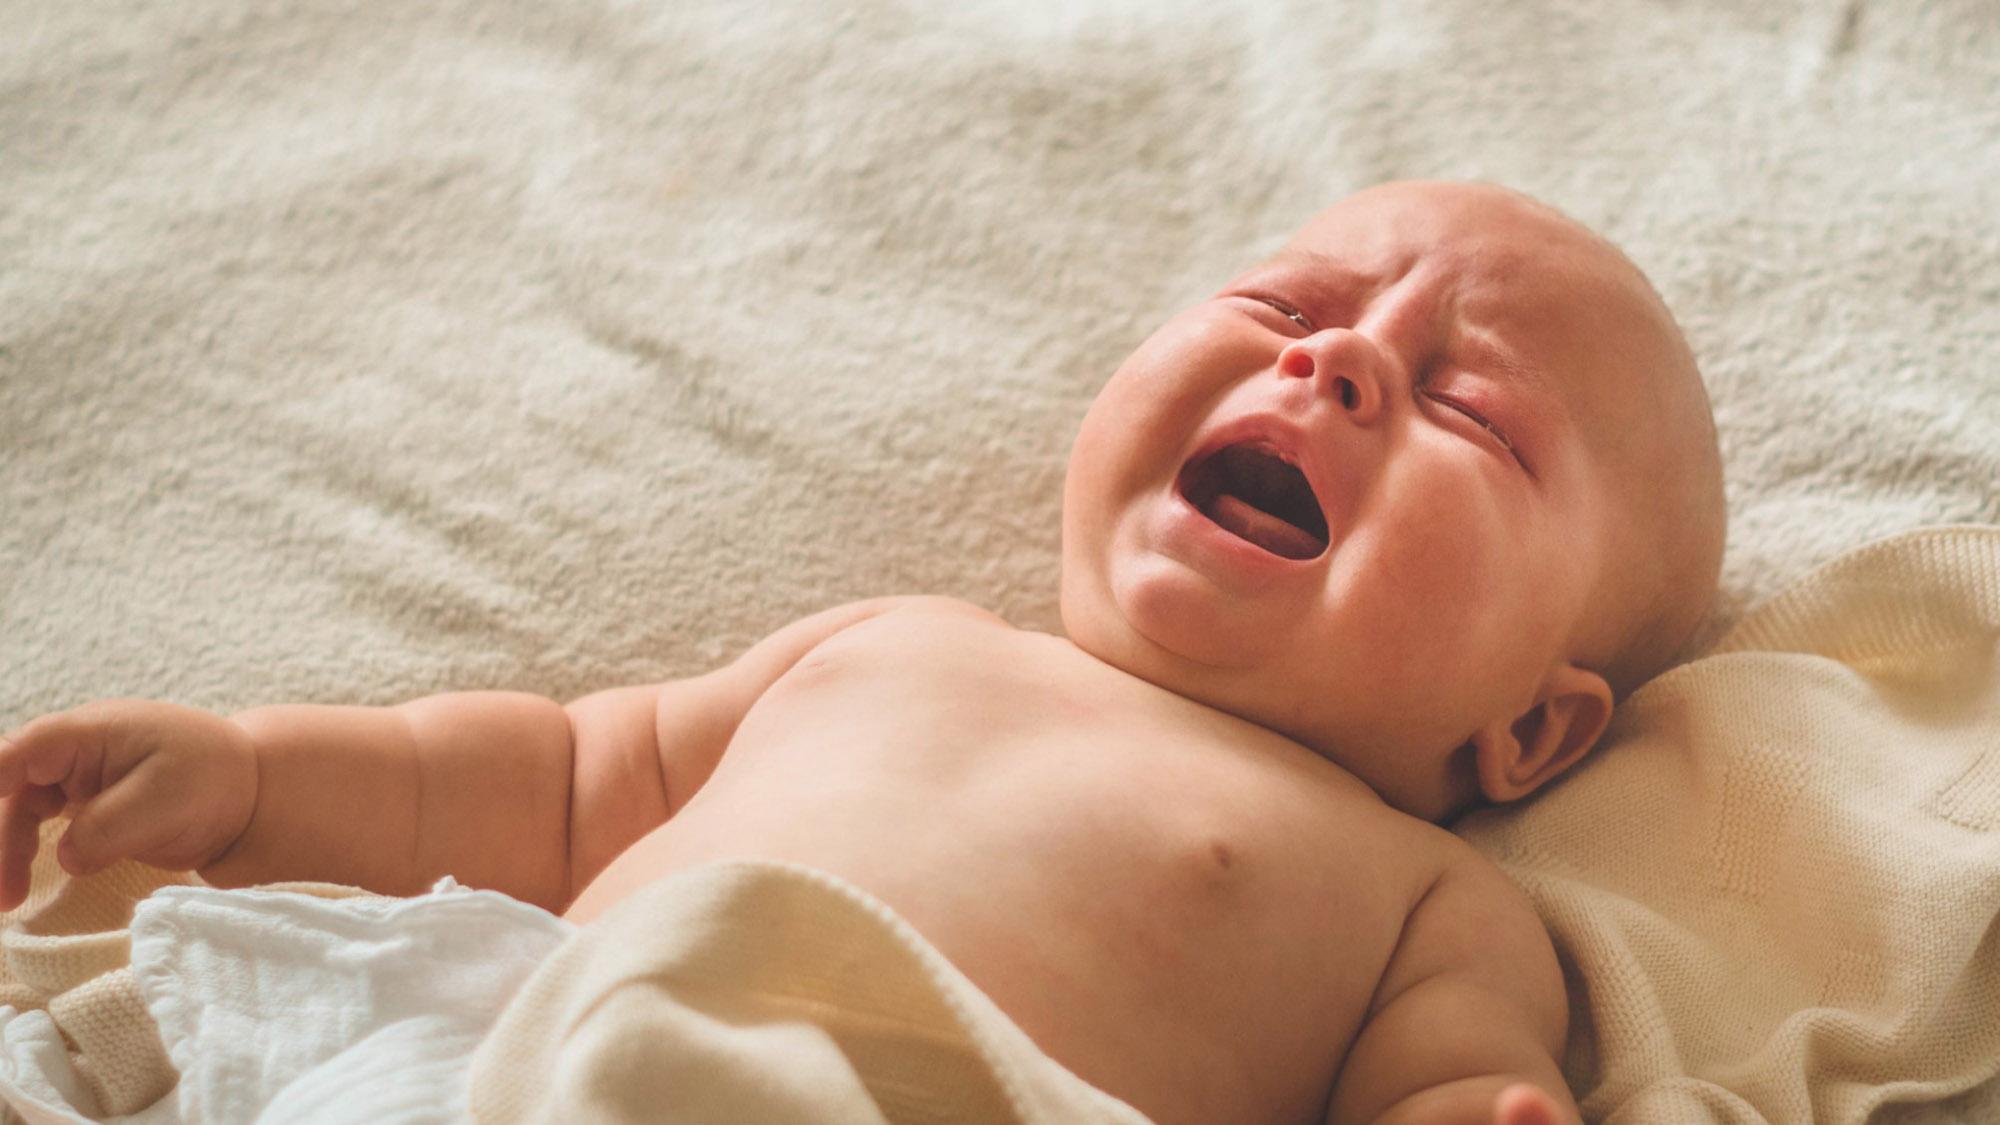 What is colic?